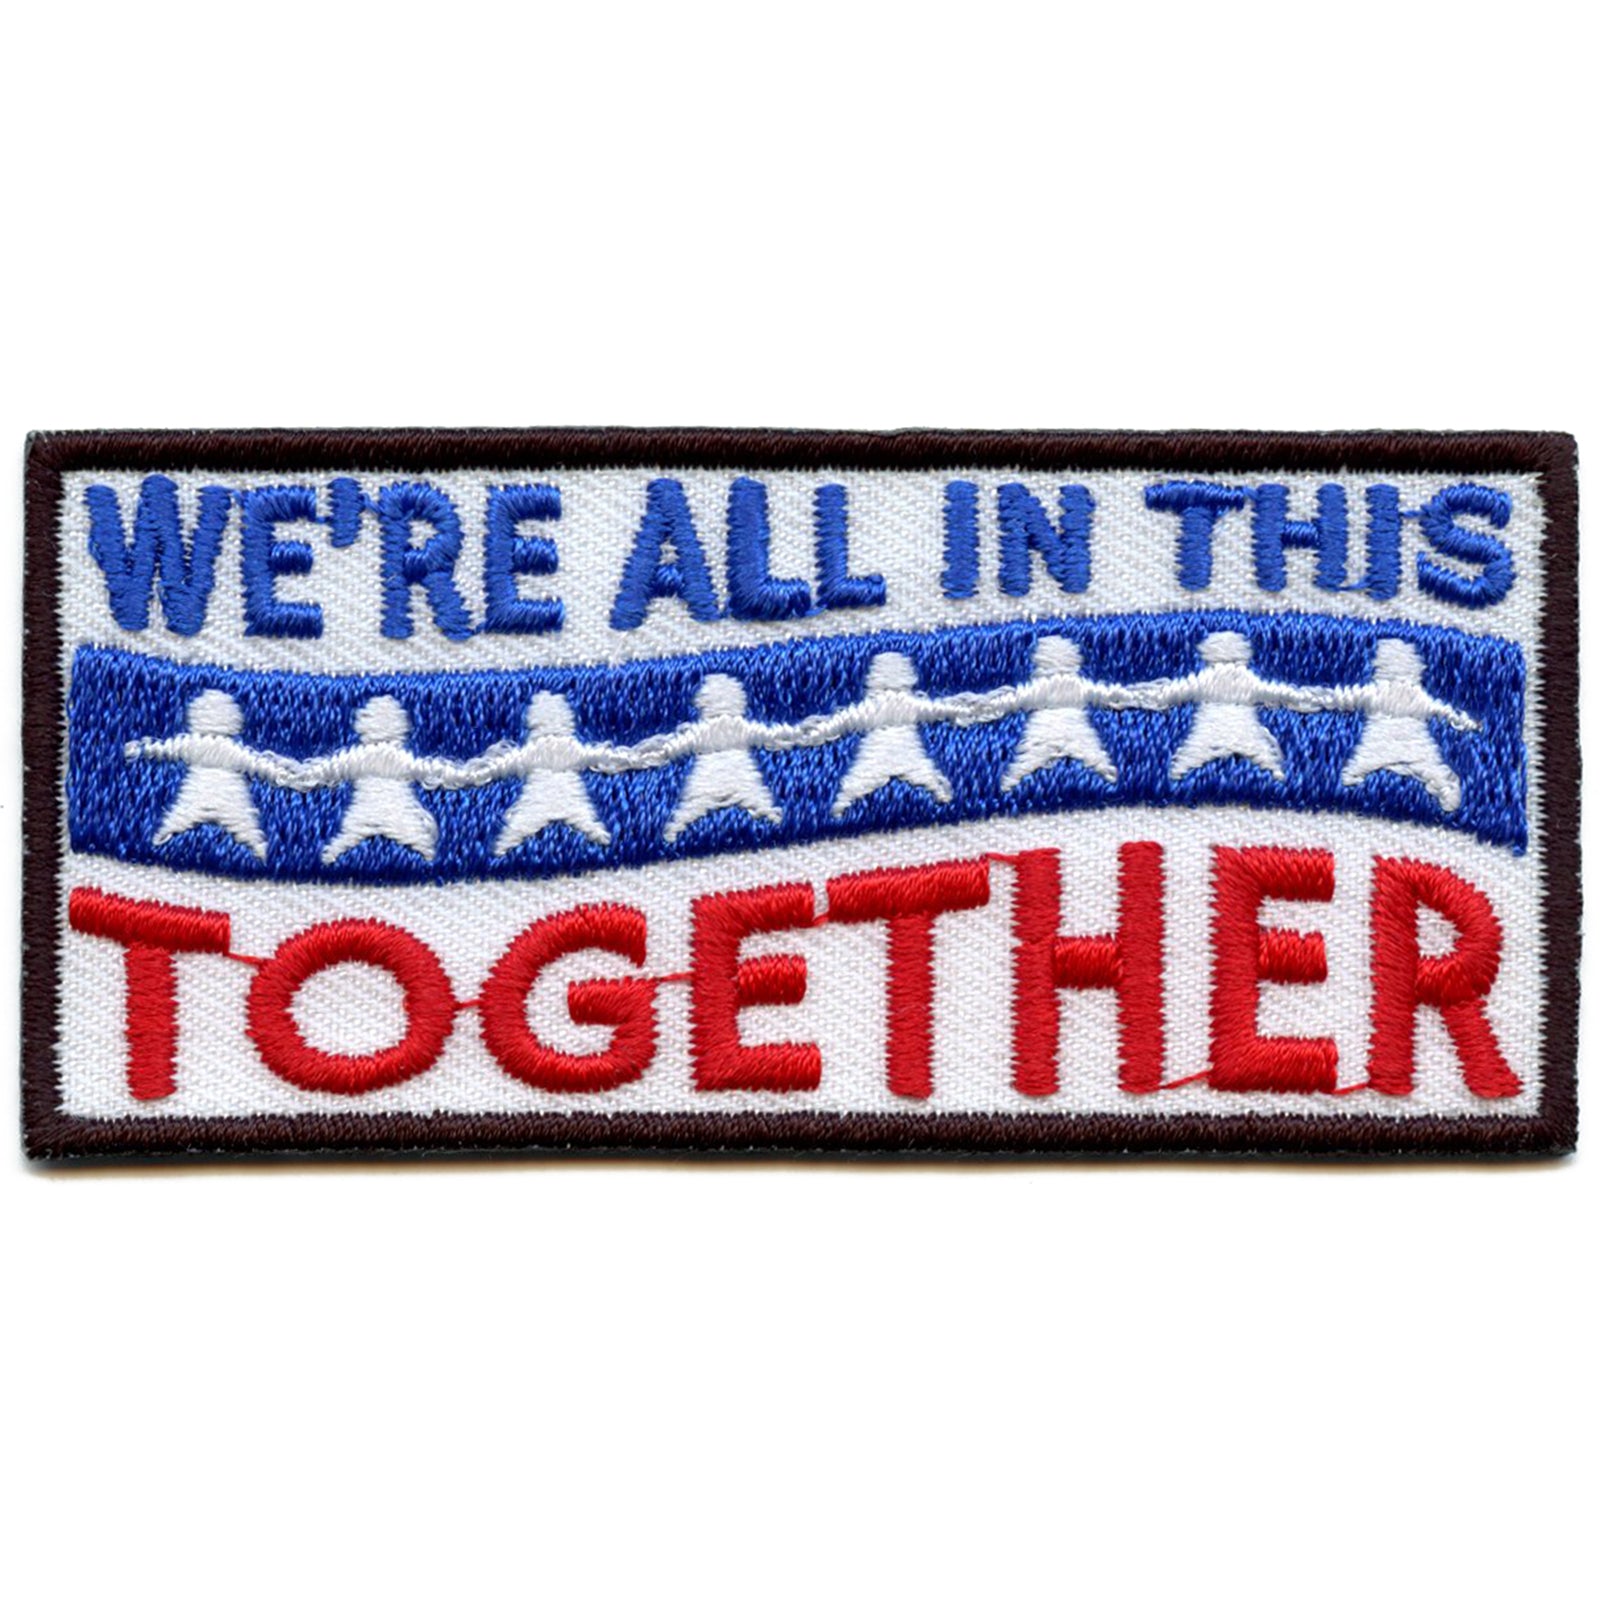 We're All In This Together Script Iron On Embroidered Patch 